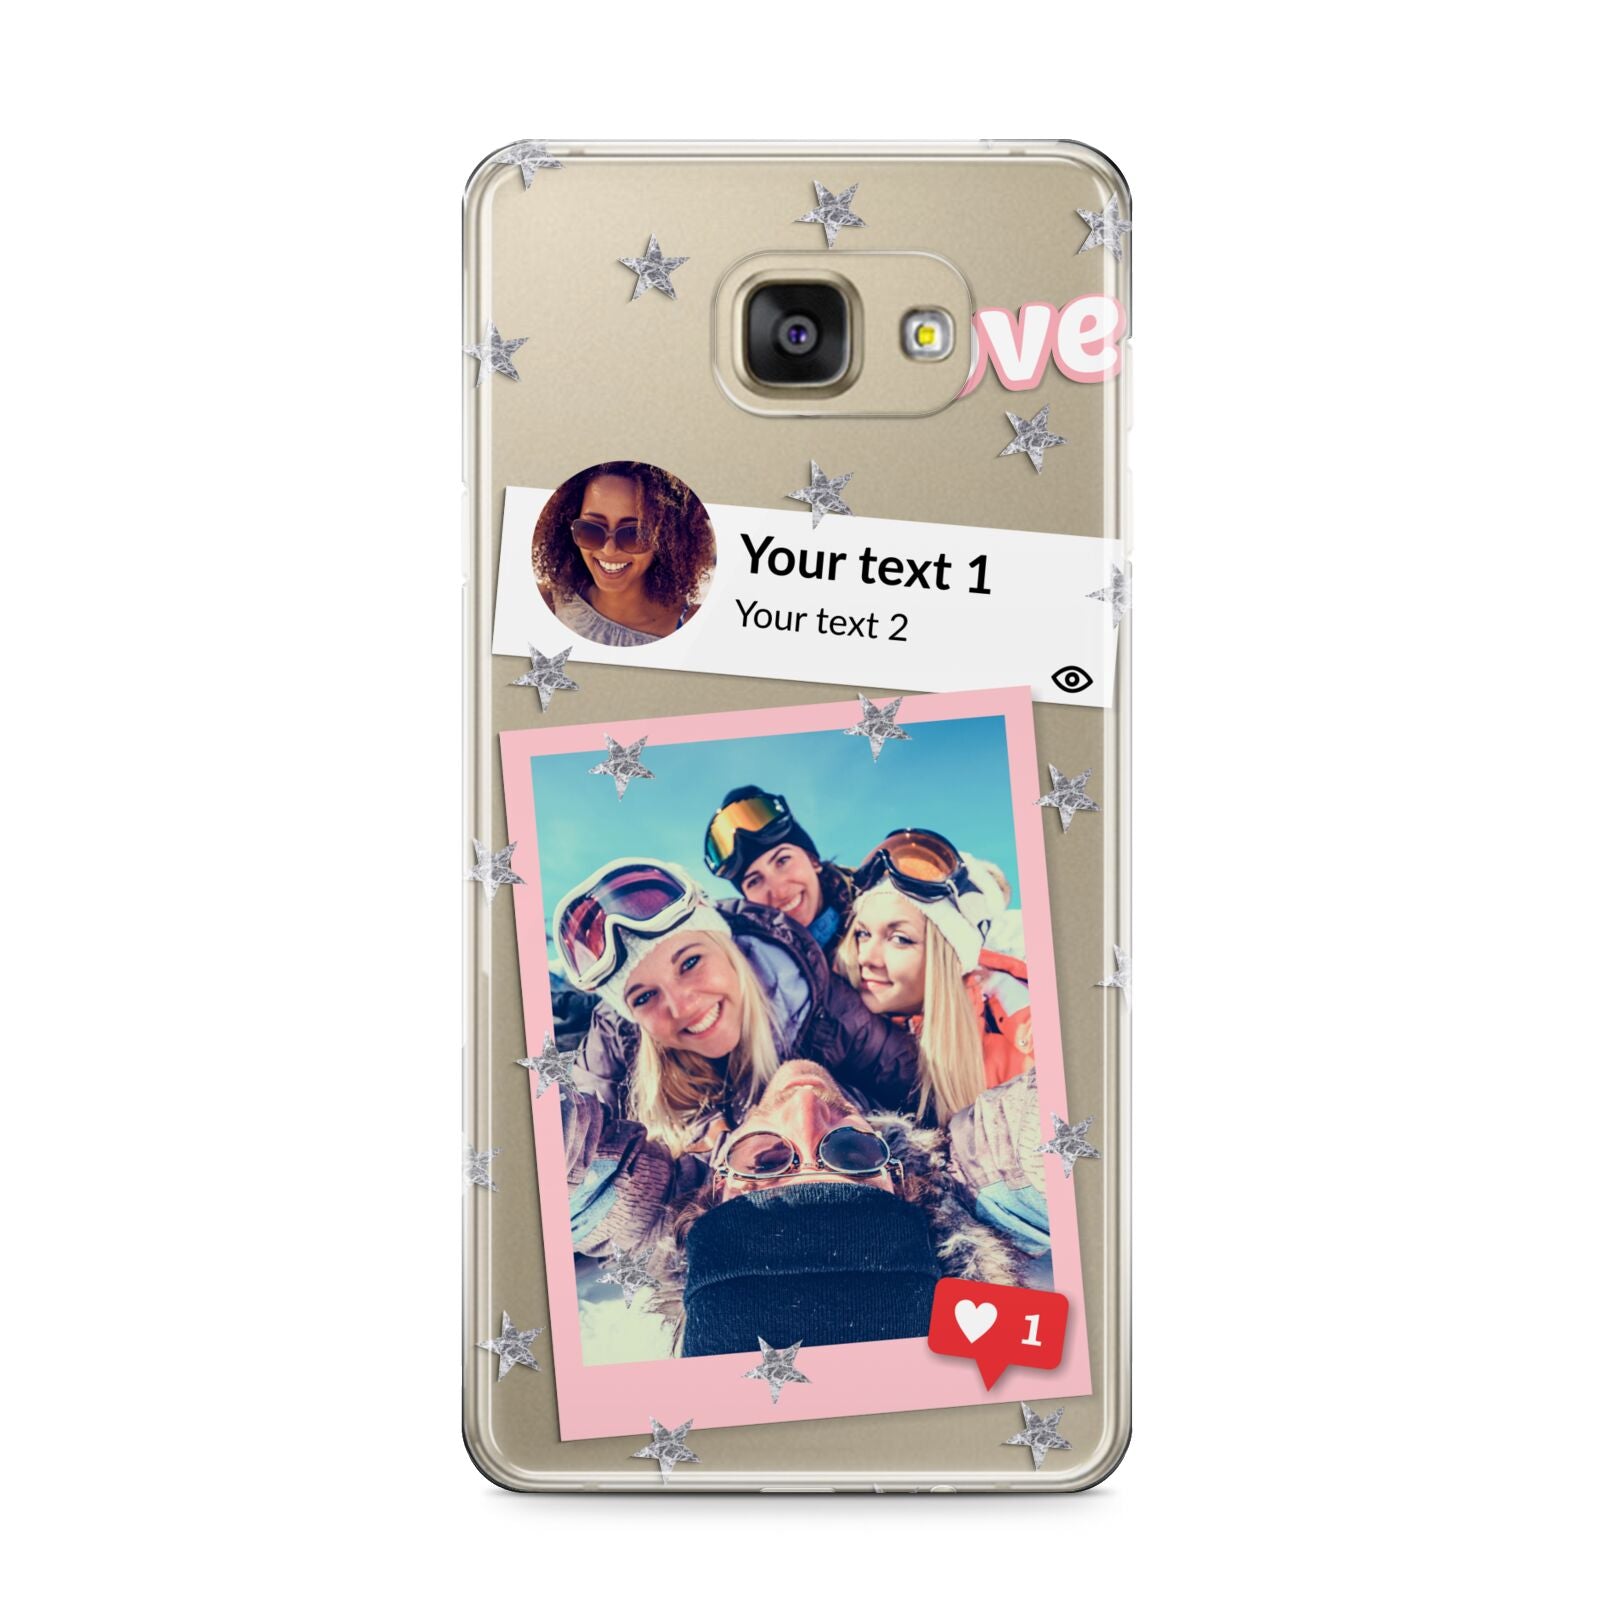 Starry Social Media Photo Montage Upload with Text Samsung Galaxy A9 2016 Case on gold phone